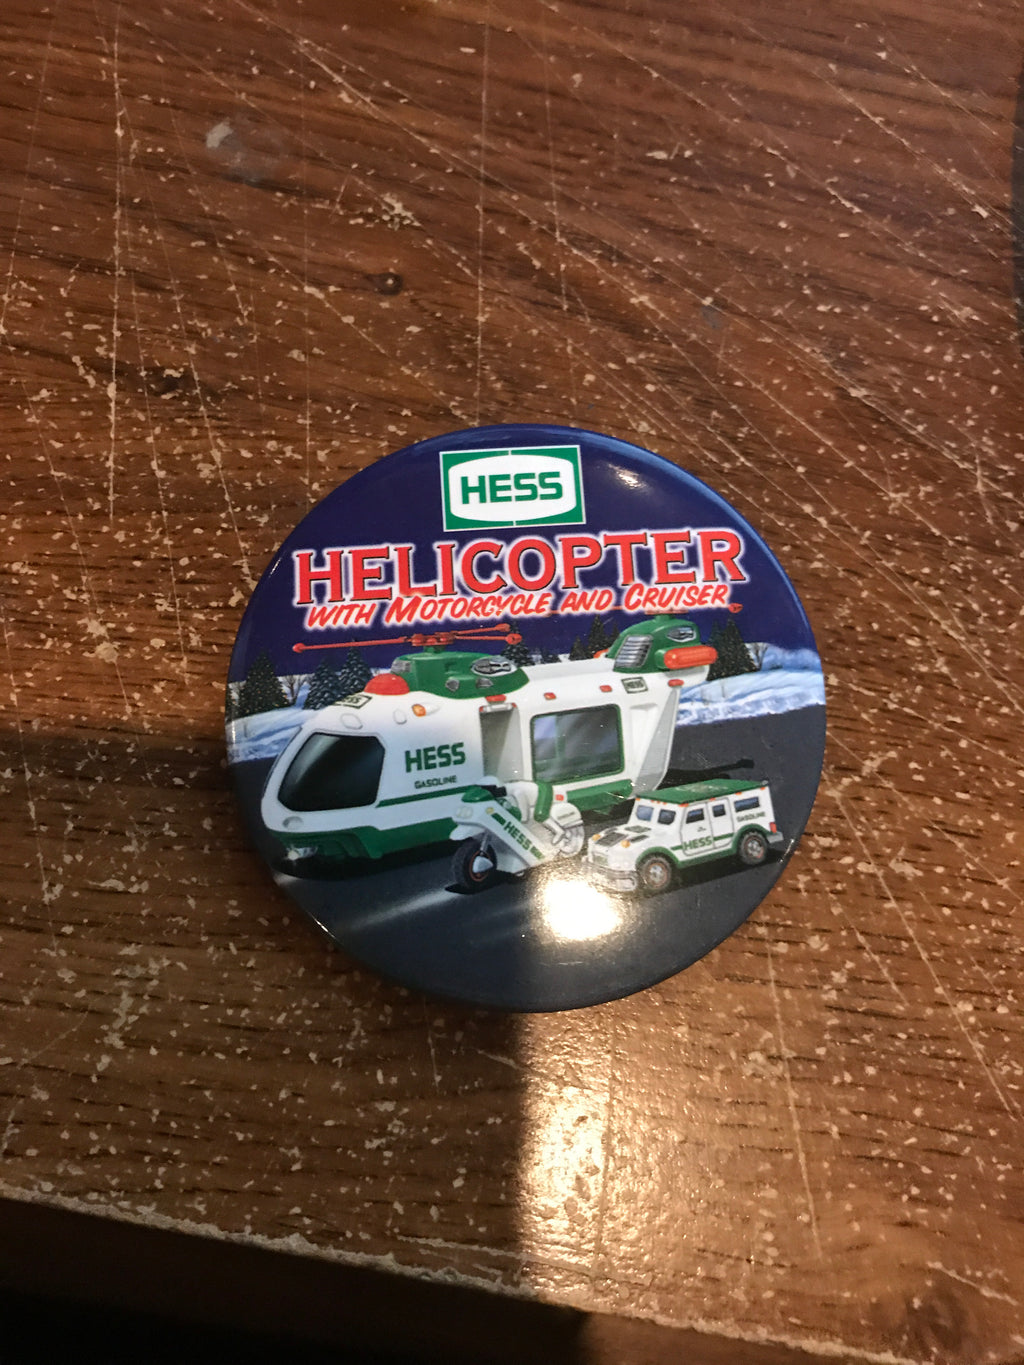 2001 Hess Helicopter With Motorcycle and Cruiser Back Button - Aj Collectibles & More